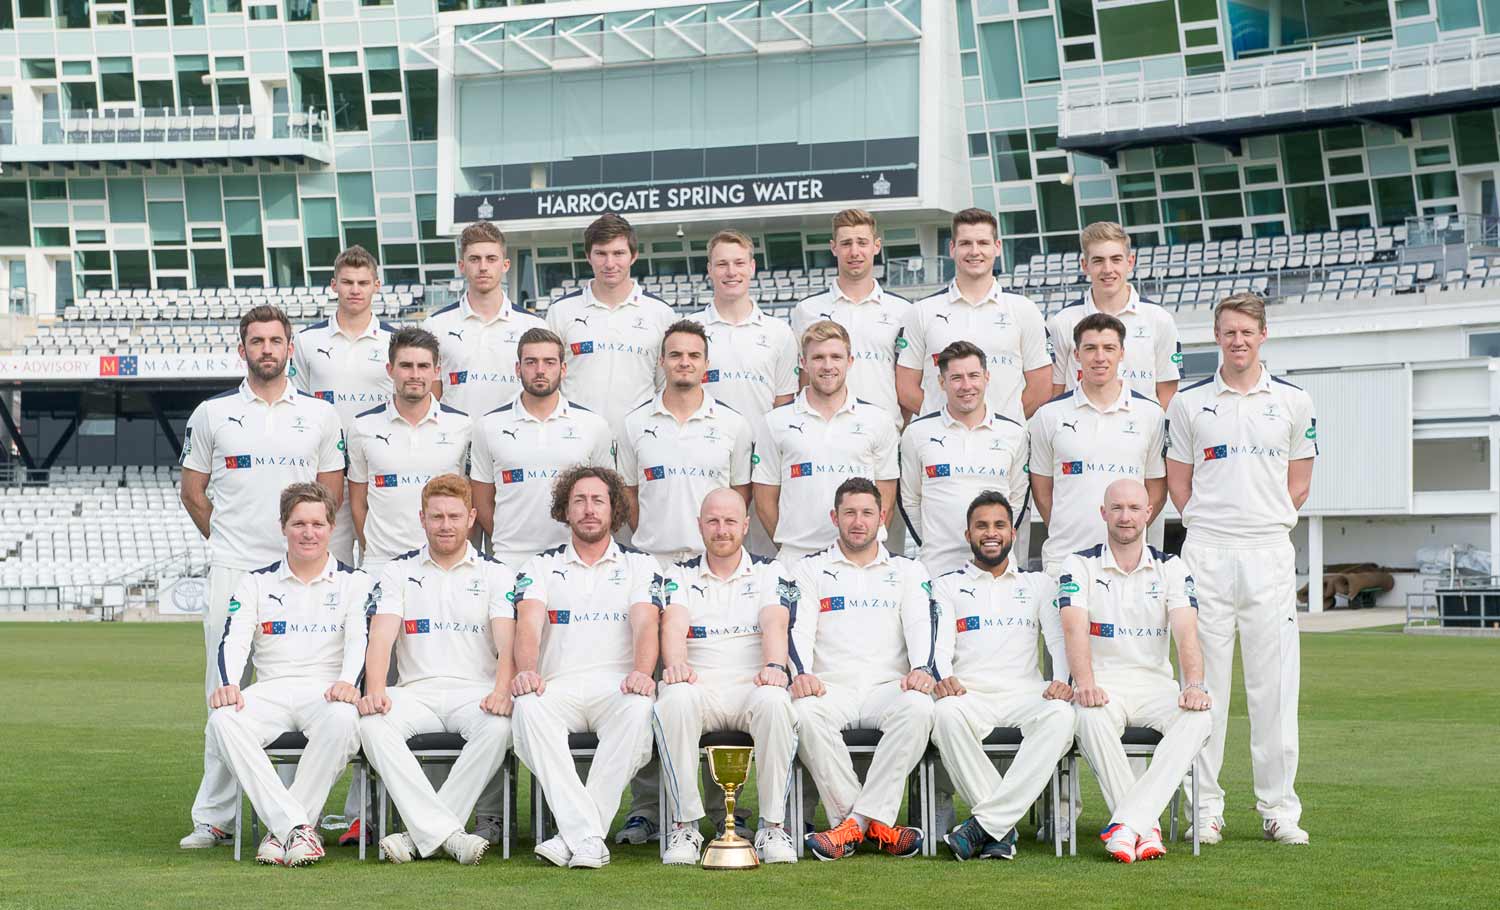 Yorkshire CCC sponsored by Harrogate Spring Water